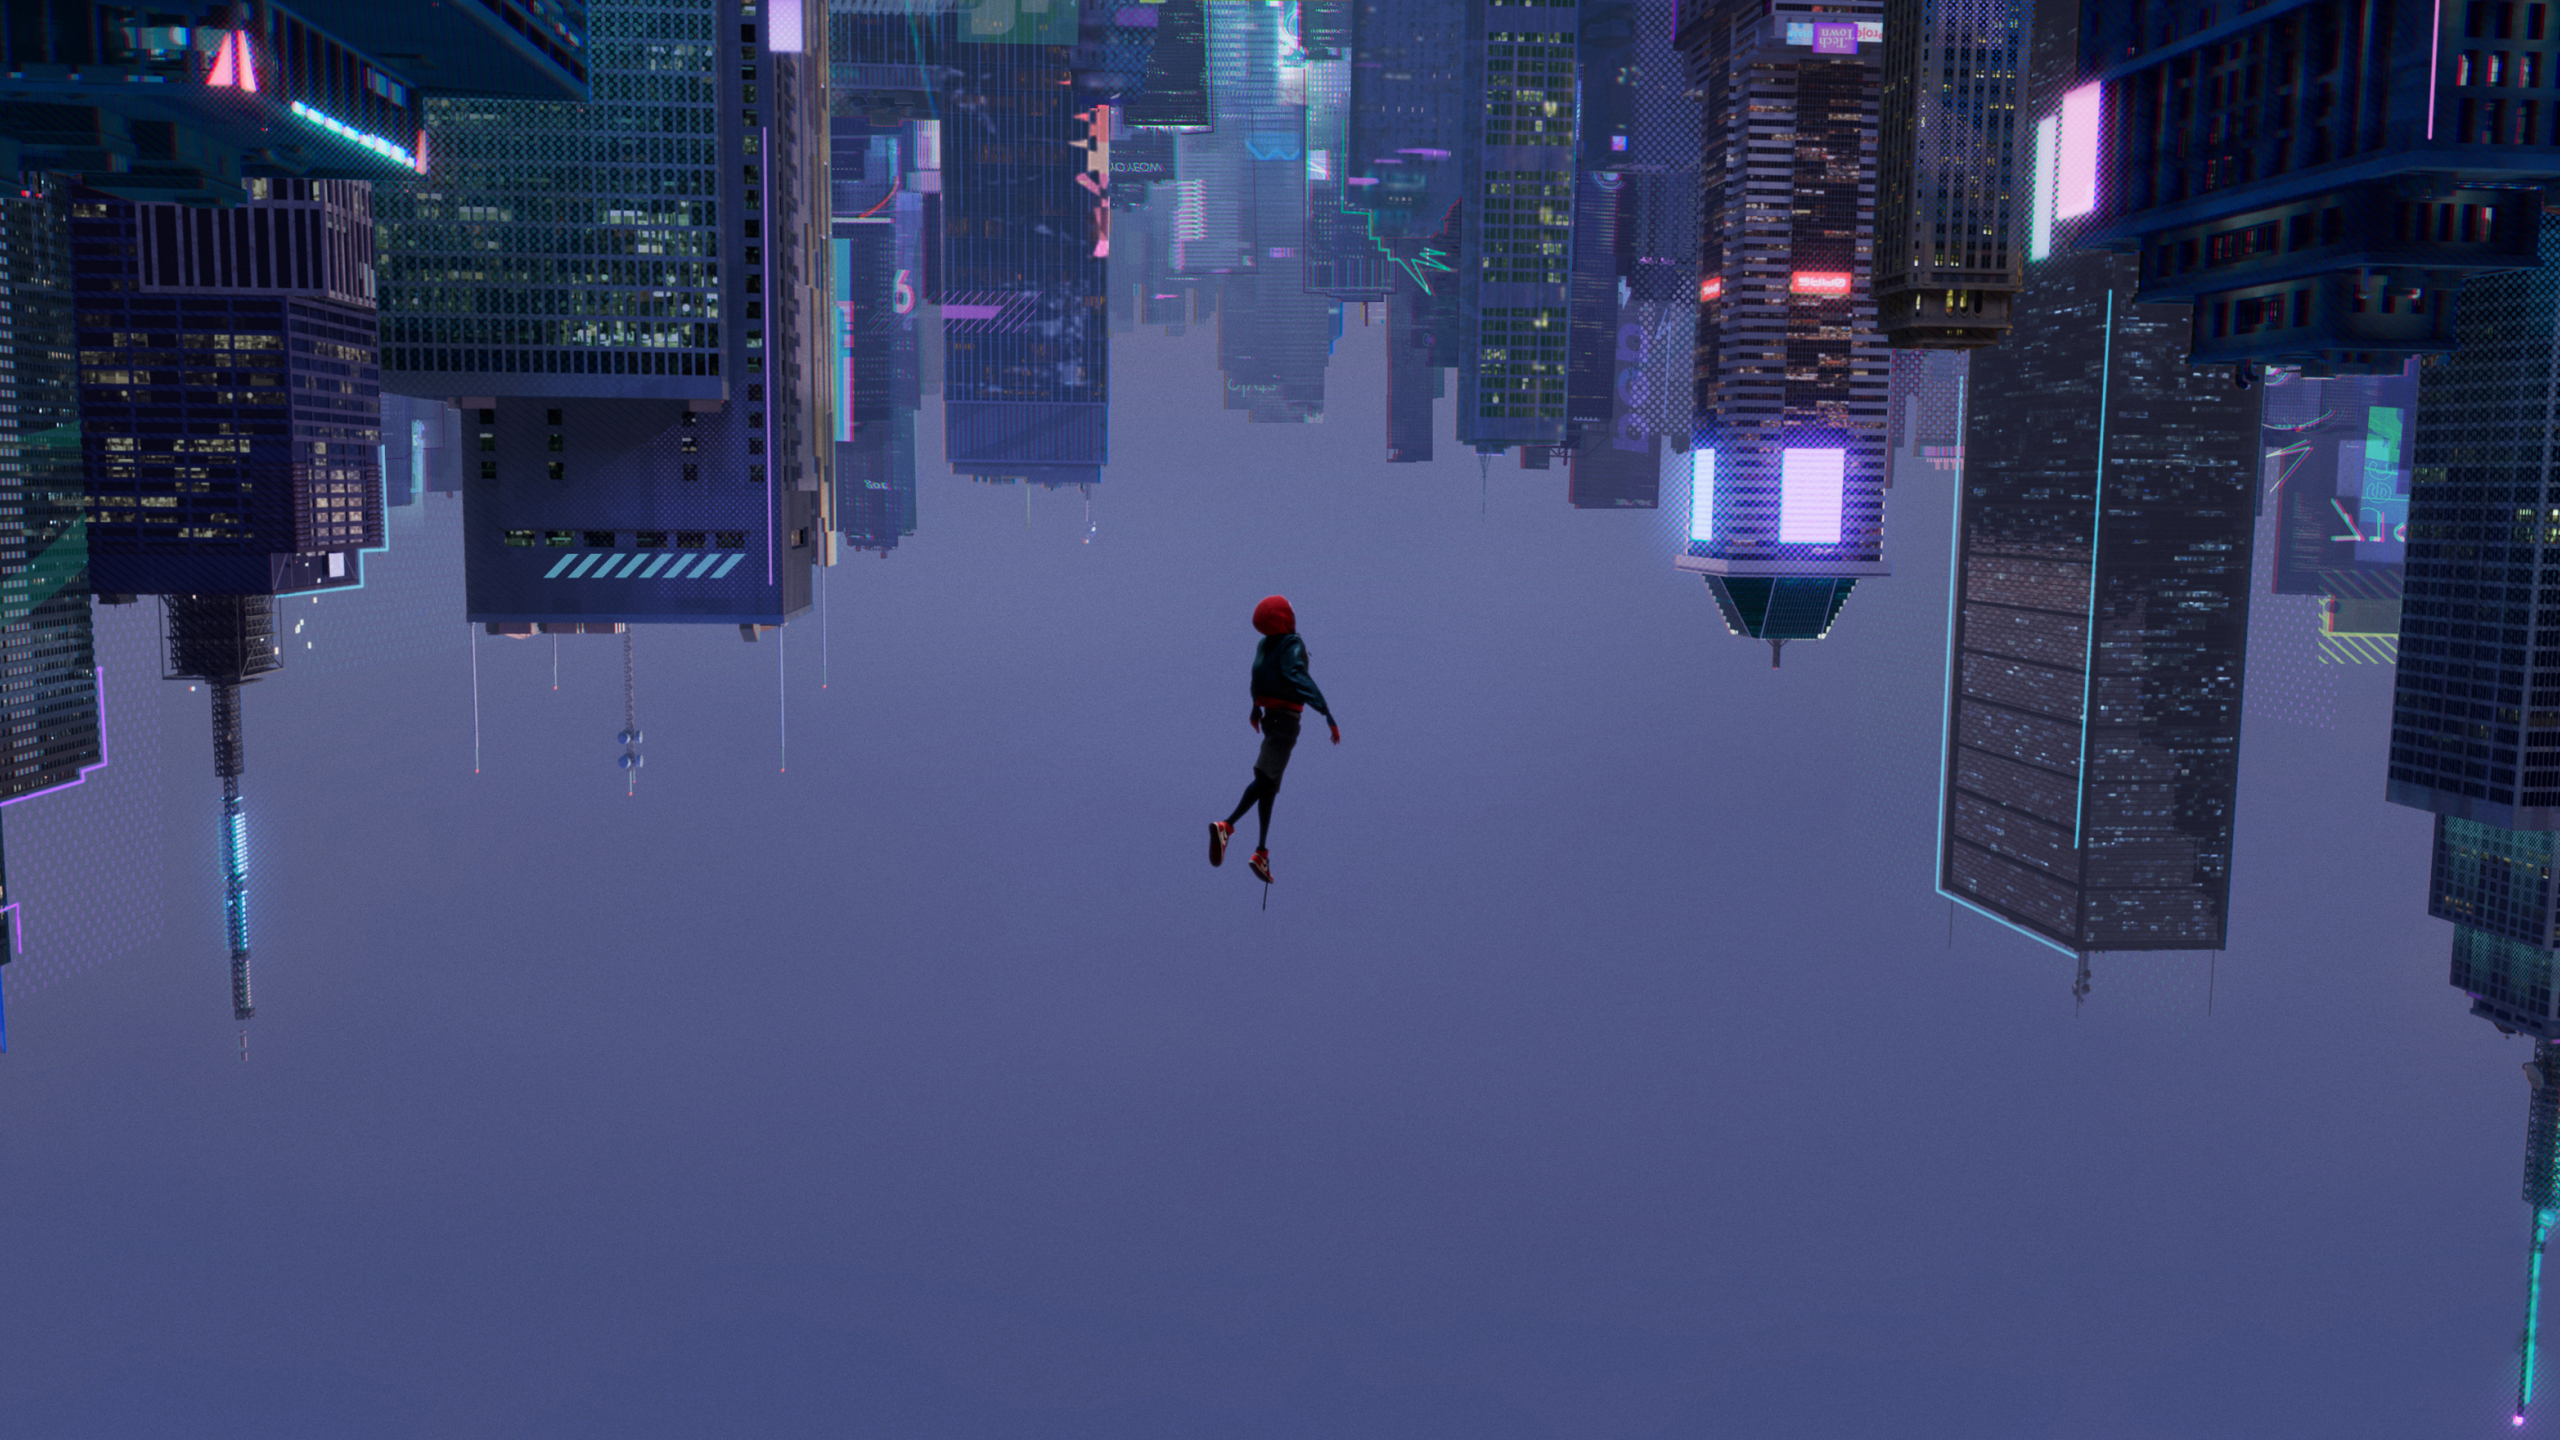 Download wallpaper 2560x1440 spider-man: into the spider-verse, 2018 movie,  animated movie, dual wide 16:9 2560x1440 hd background, 1584